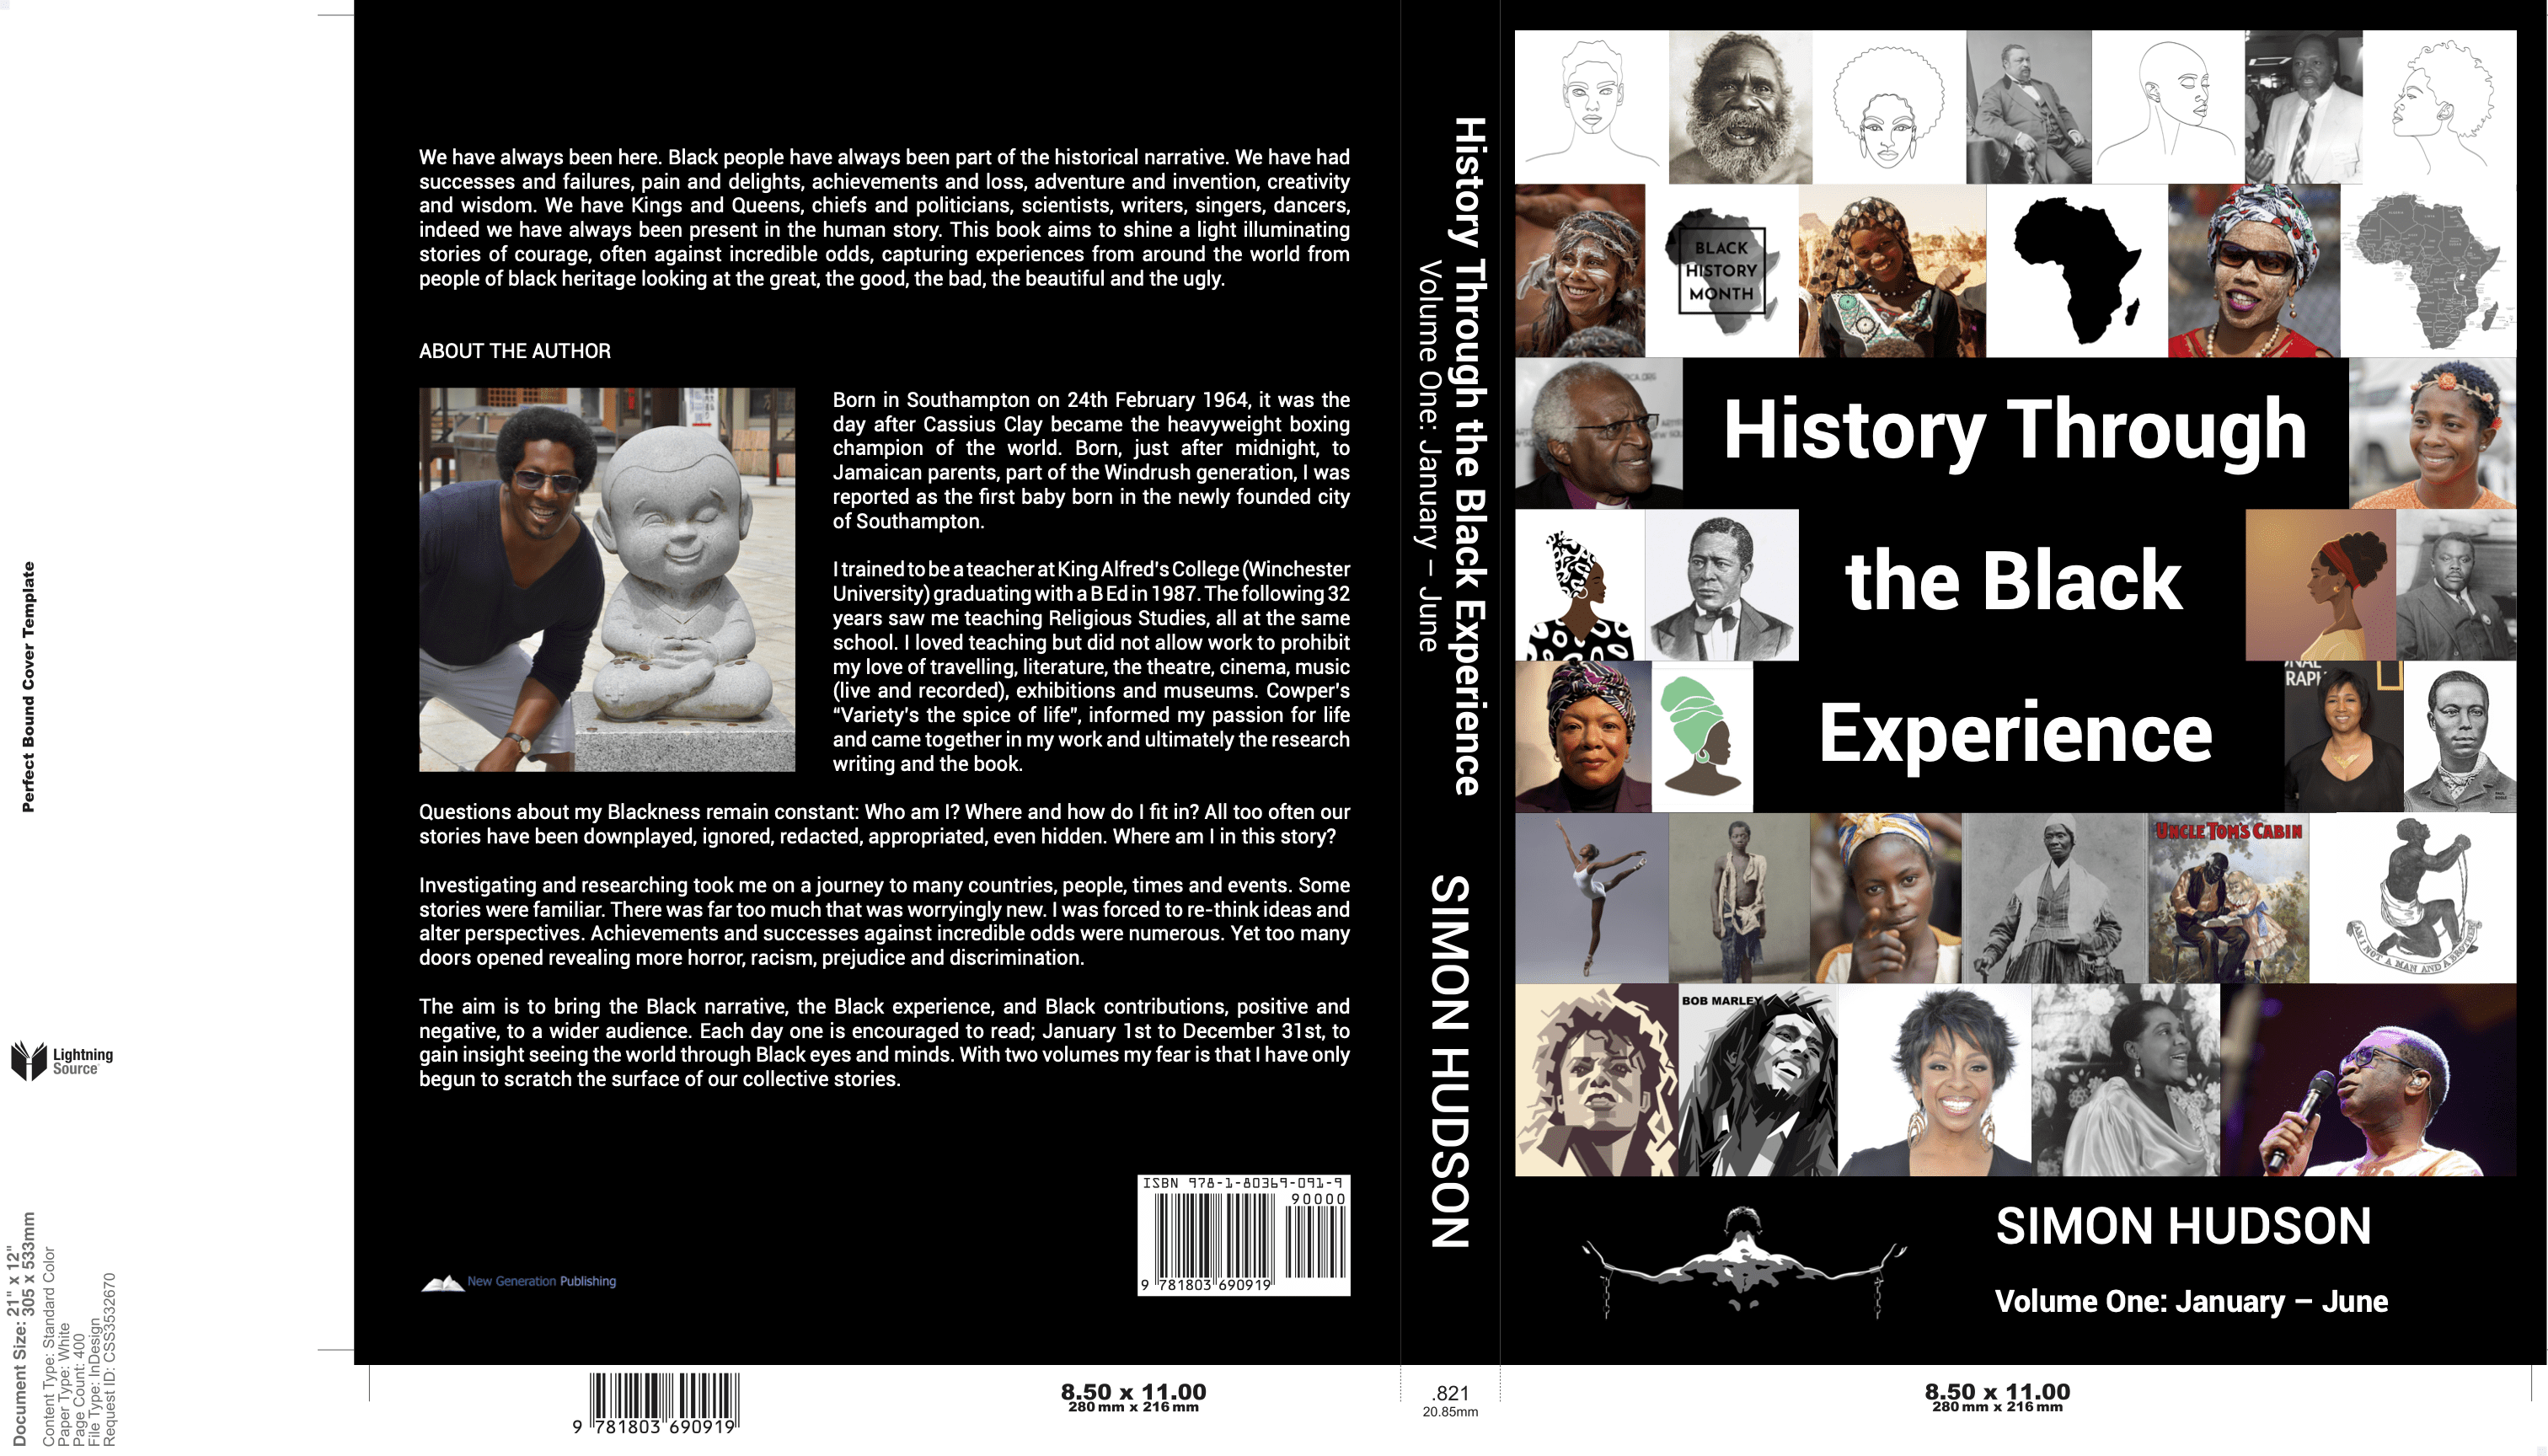 History Through the Black Experience